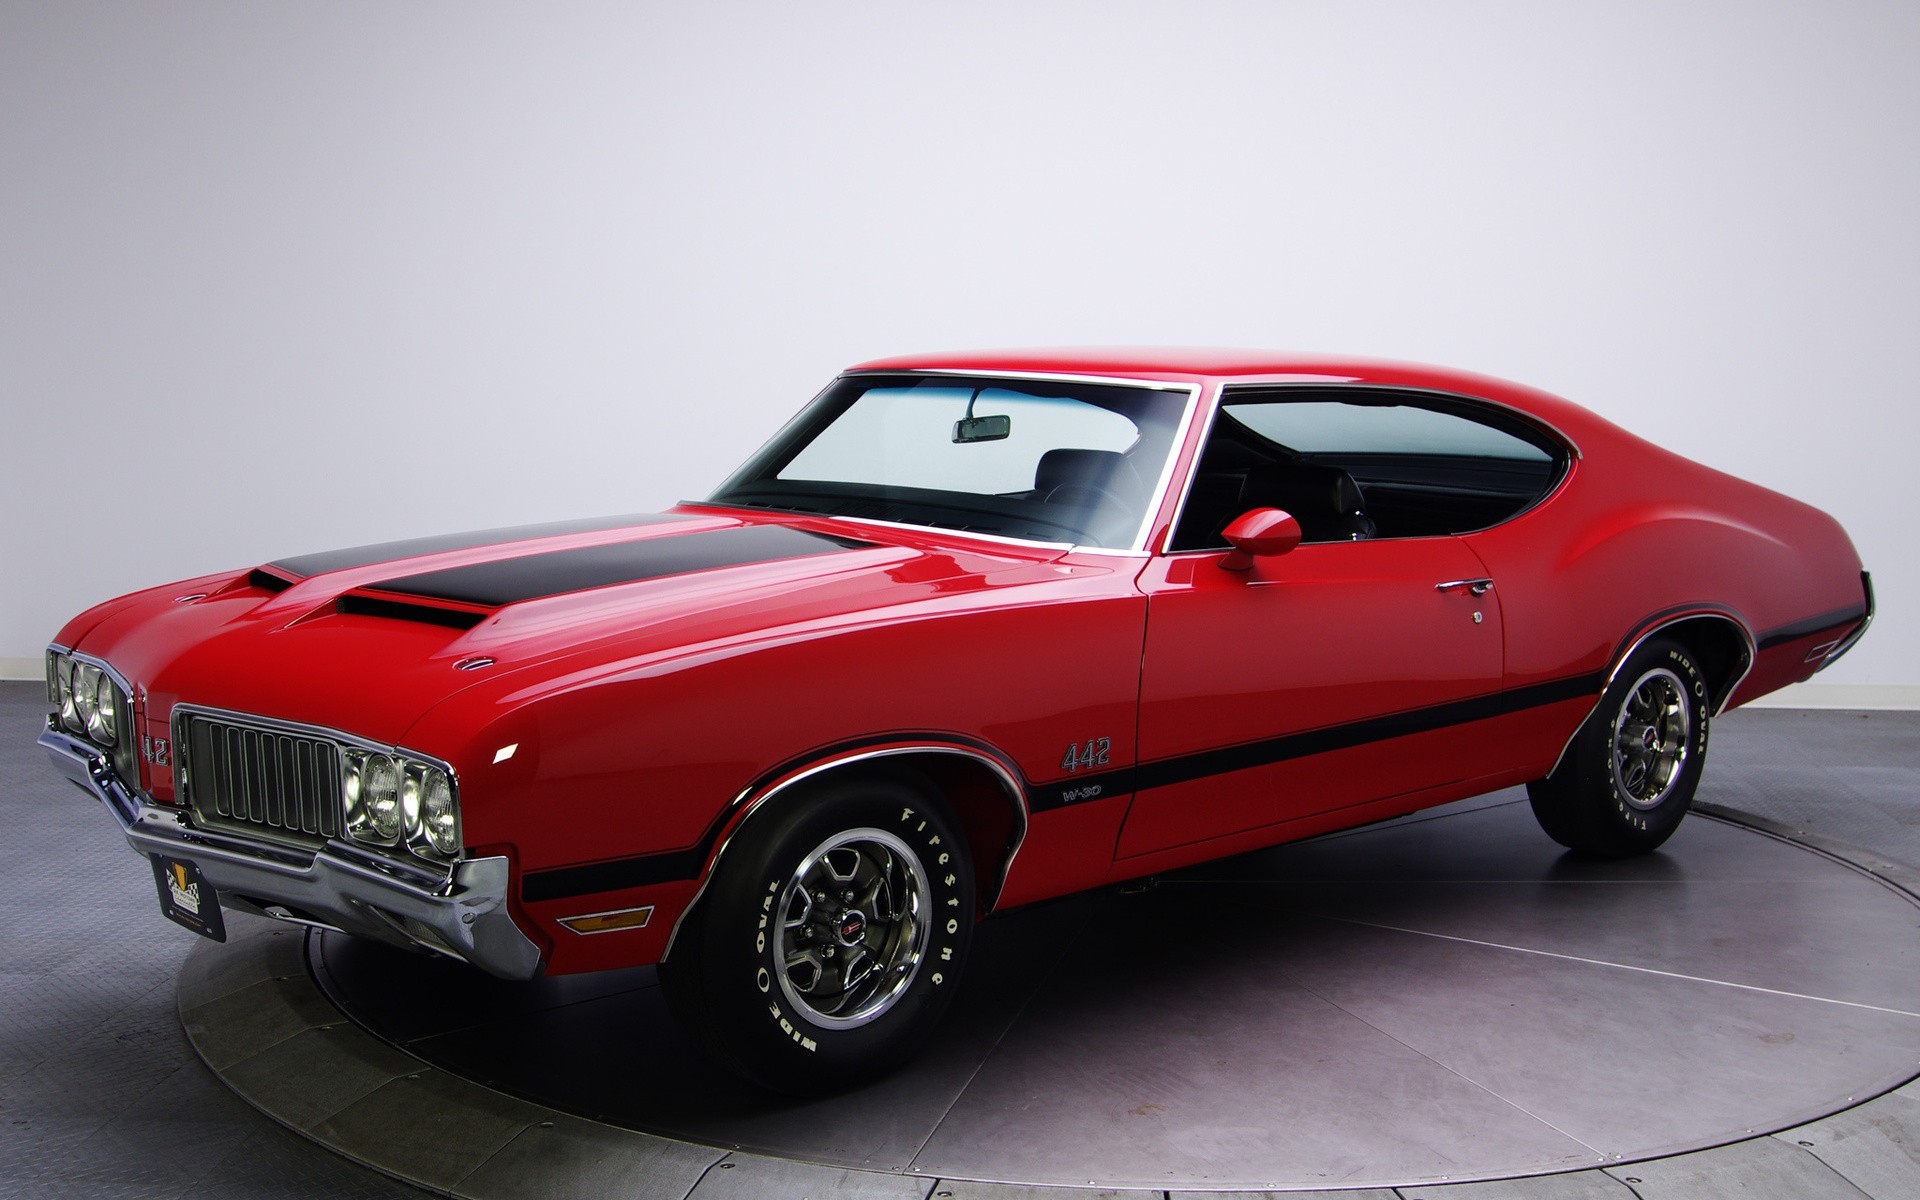 General 1920x1200 red cars vehicle car Oldsmobile Oldsmobile 442 muscle cars American cars